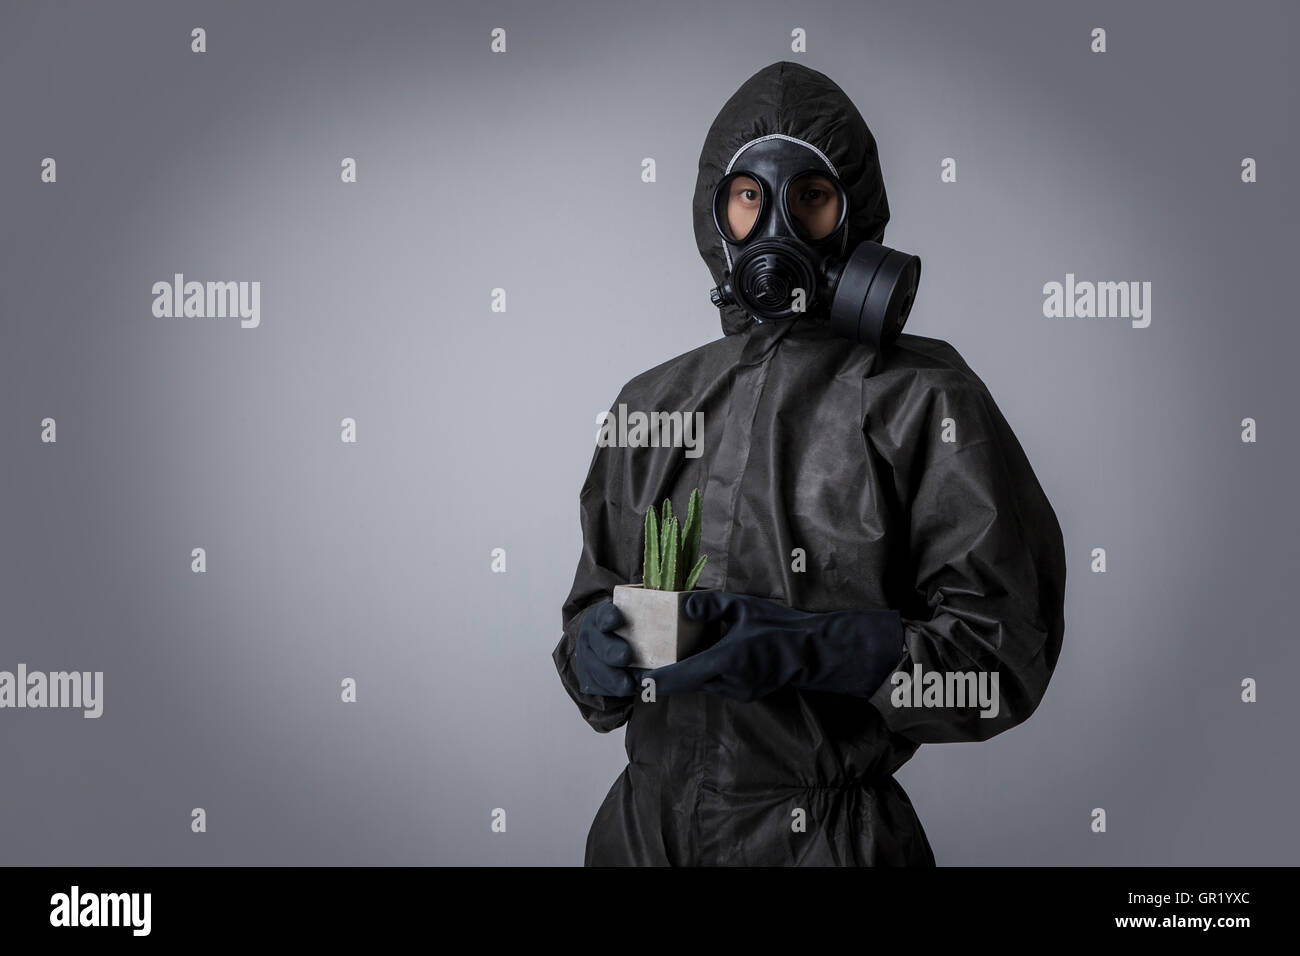 Young man wearing gas mask and black clothes holding planted pot Stock Photo